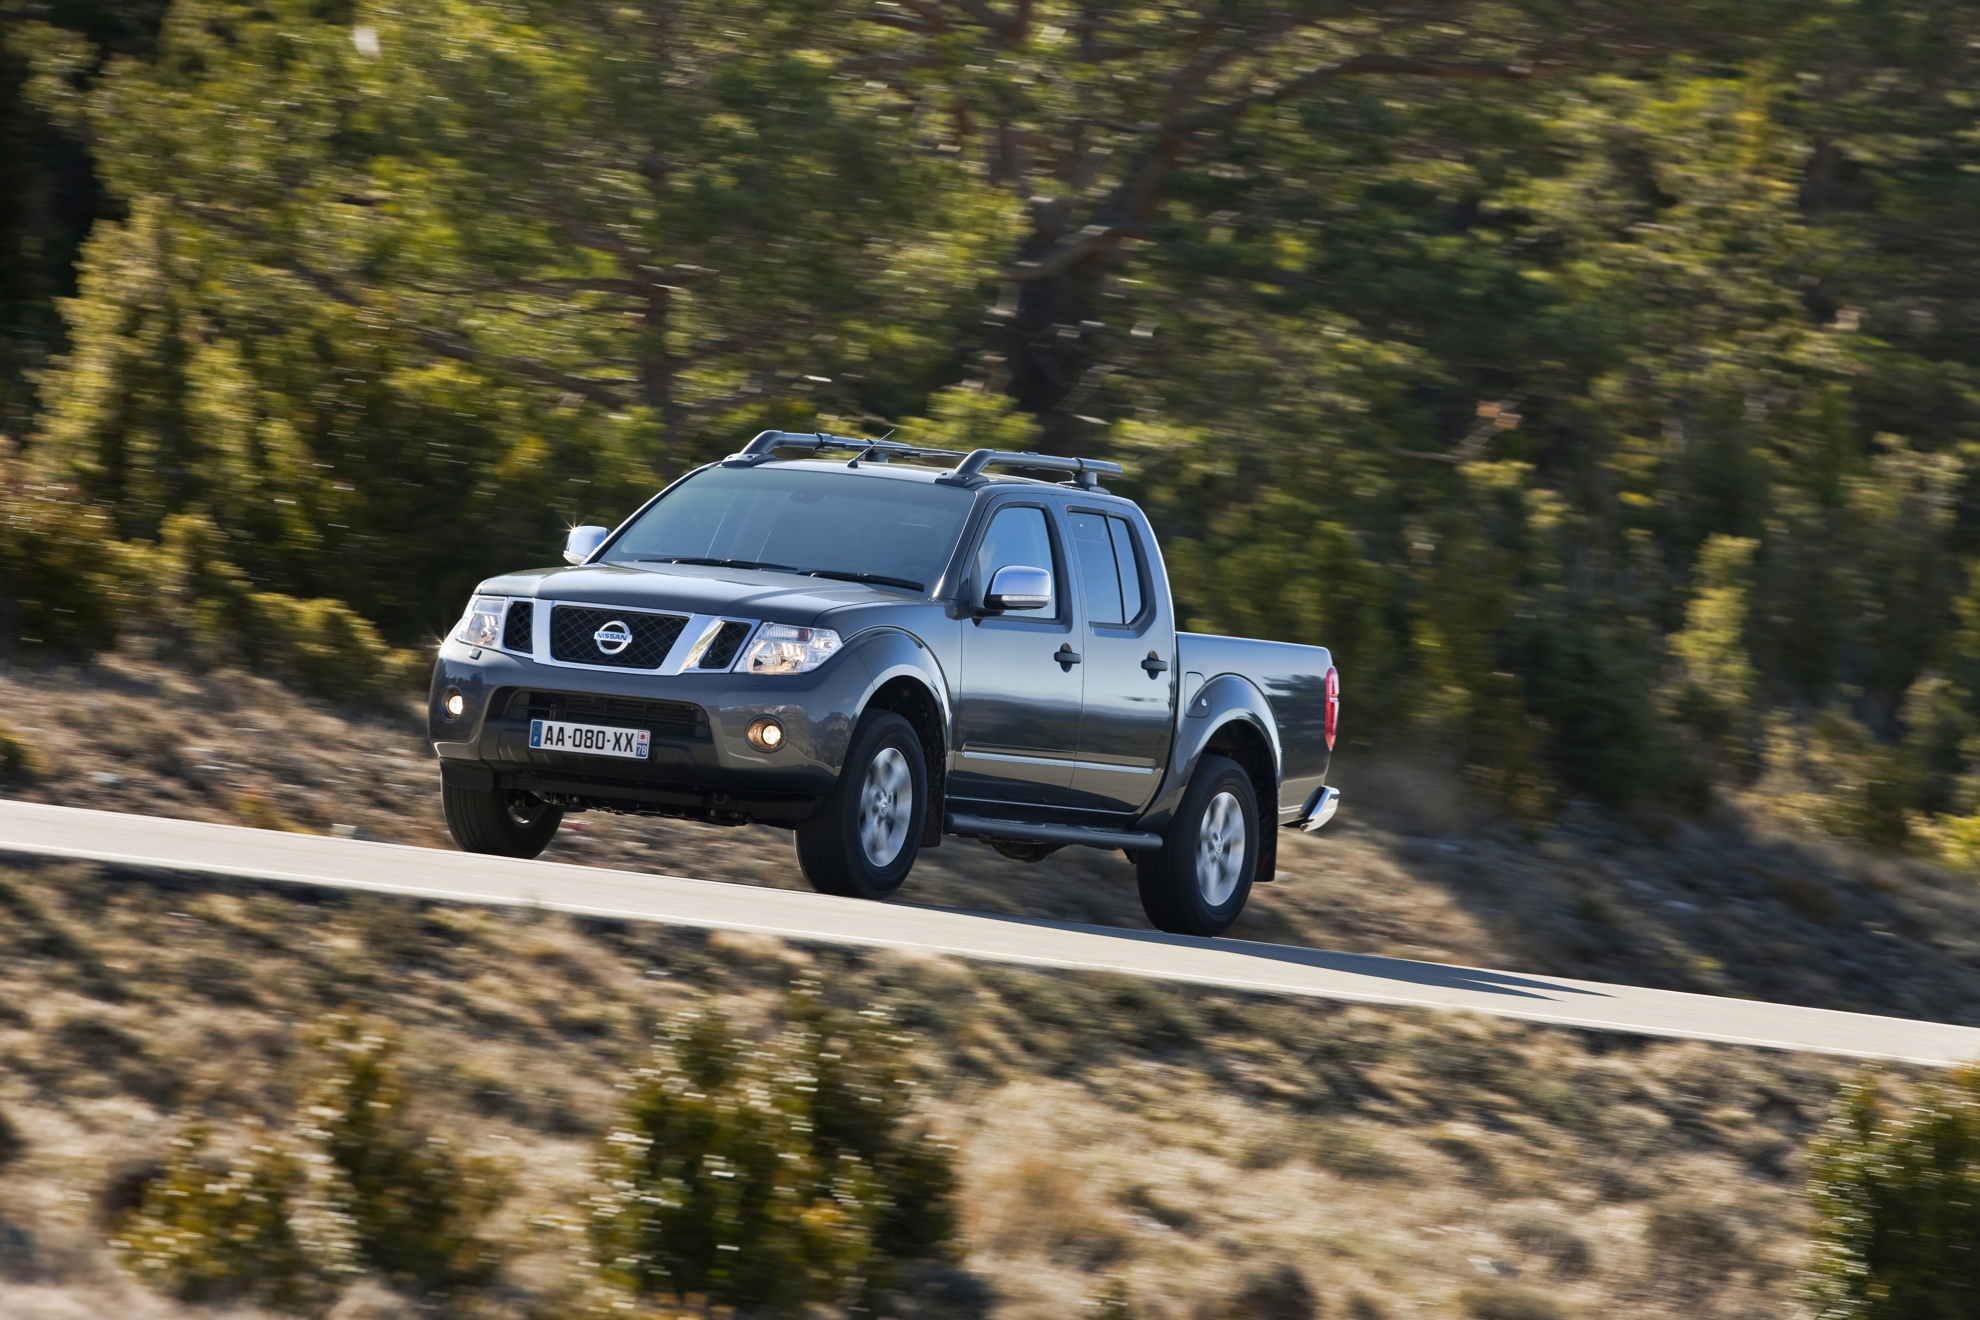 NISSAN NAVARA PICKS UP MORE FEATURES FOR 2015